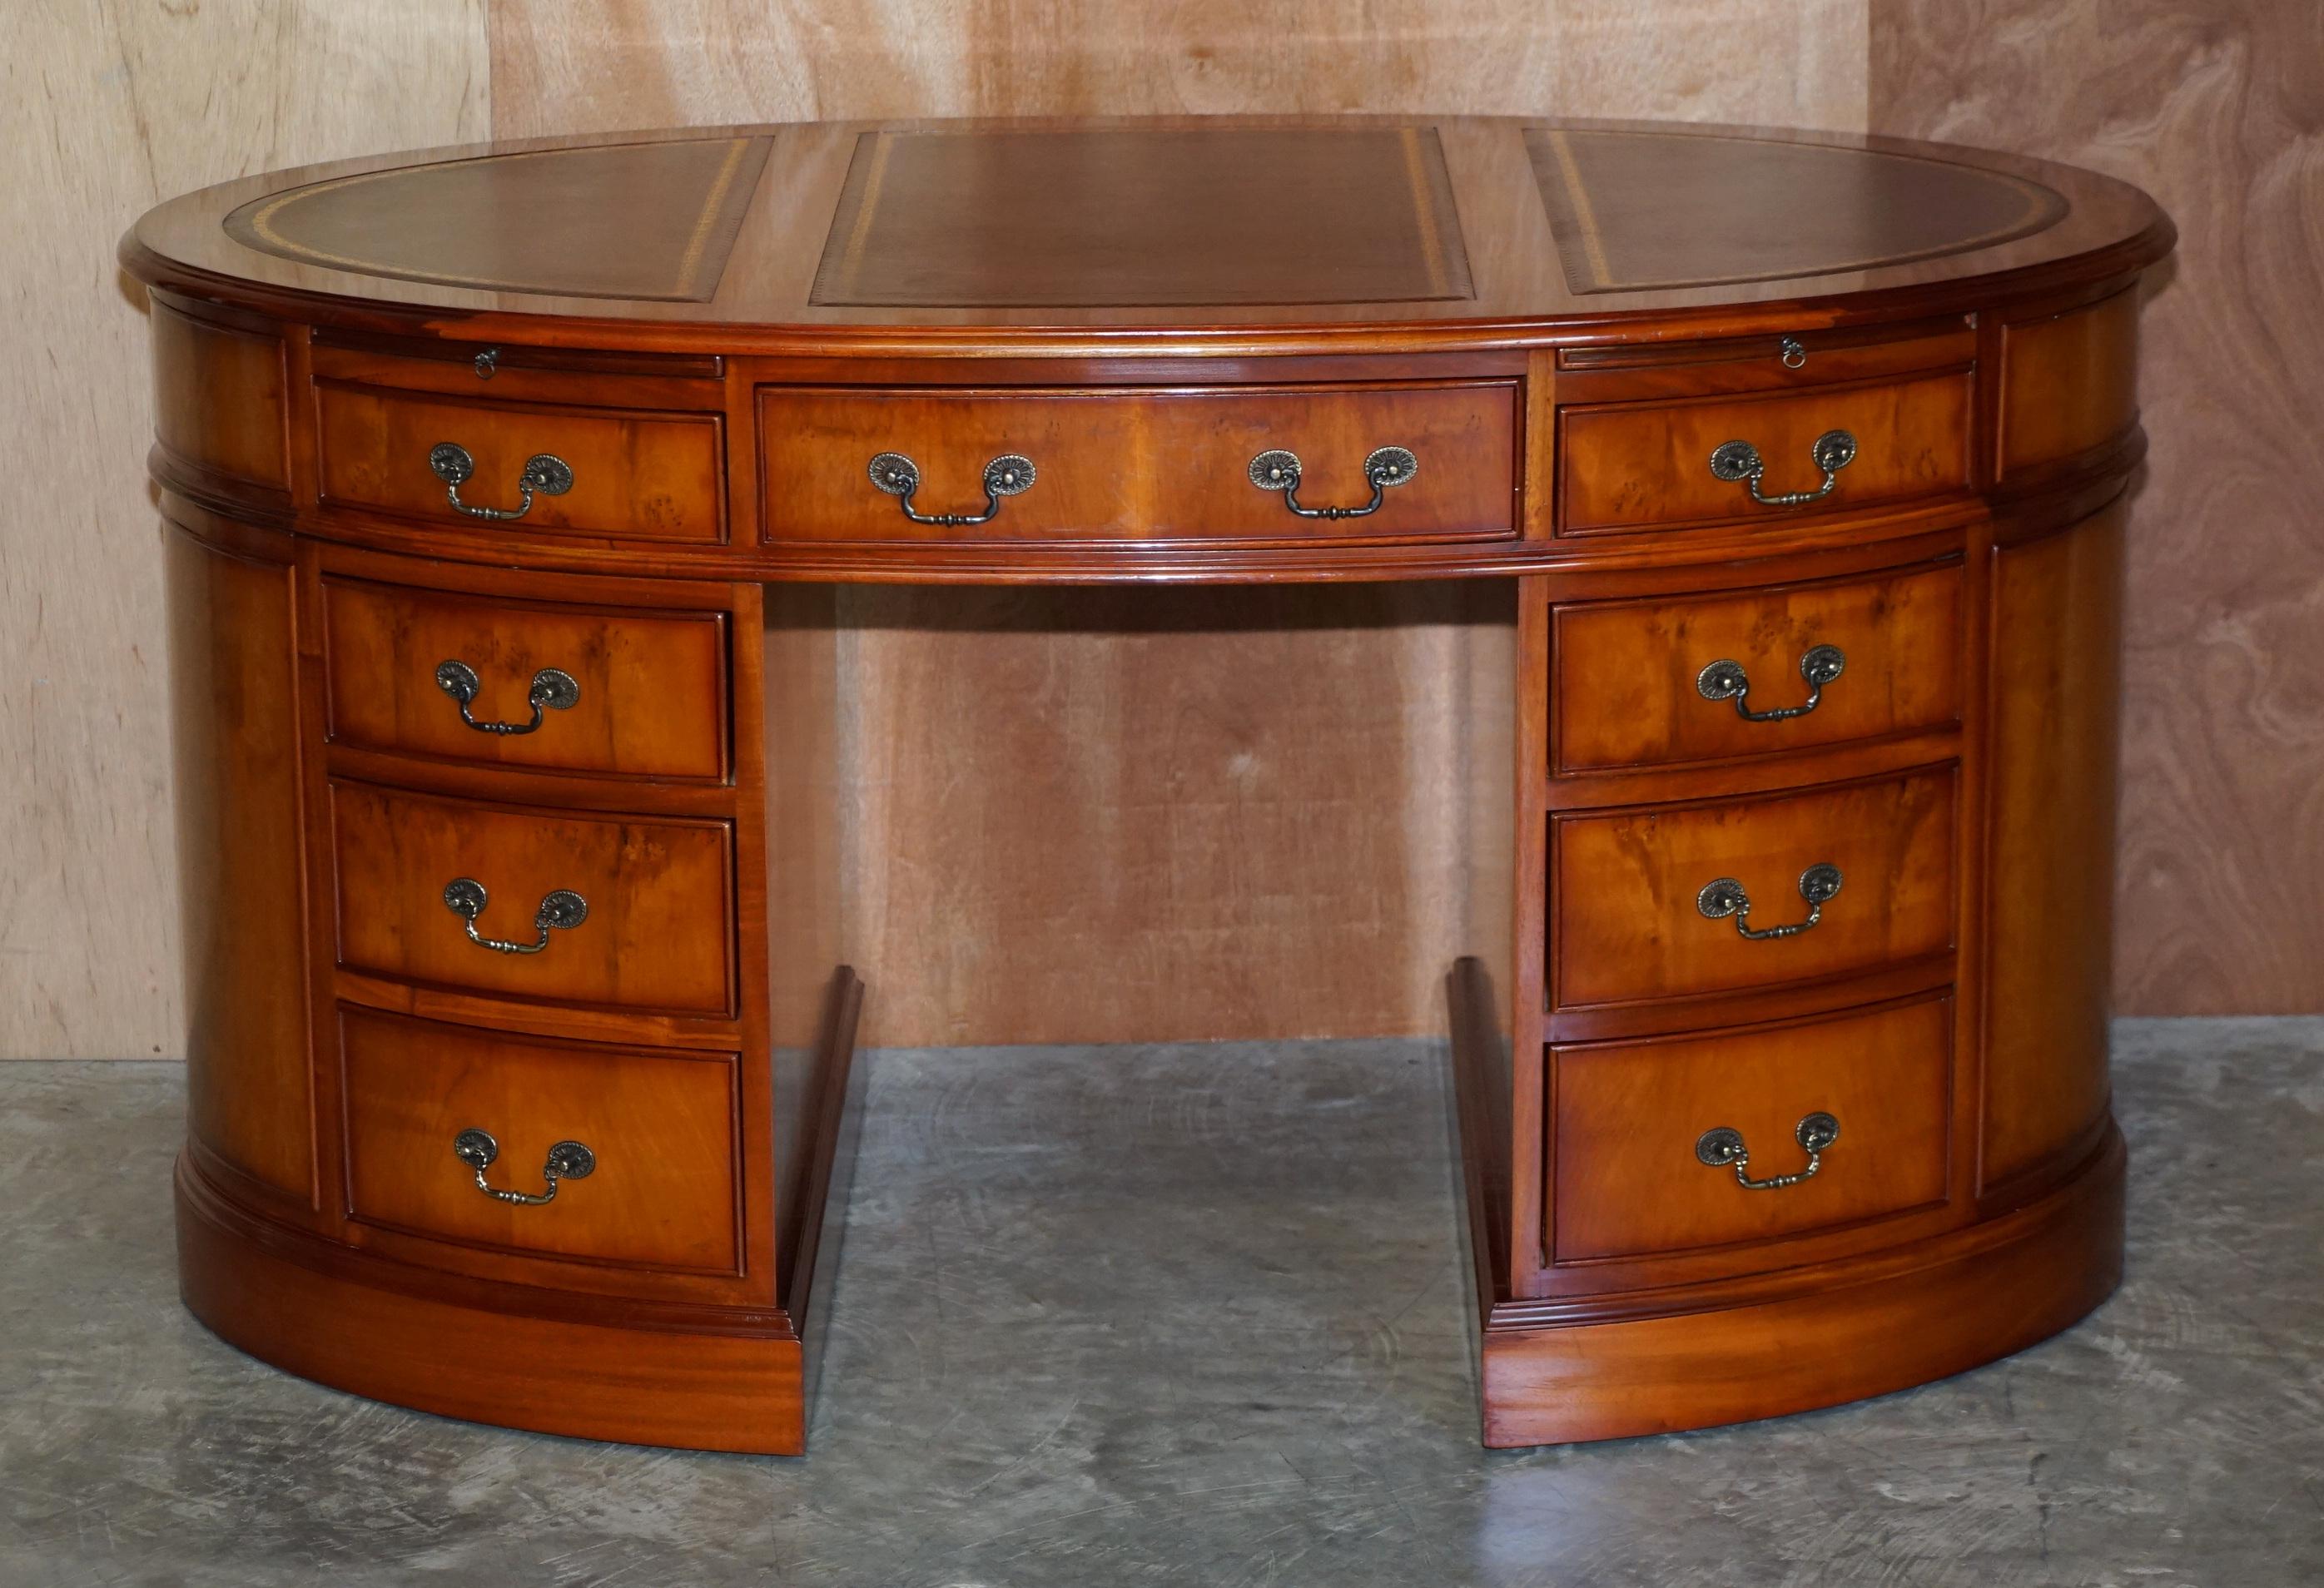 We are delighted to offer for sale this lovely burr yew wood oval pedestal partner desk with split panel oxblood leather writing surface and twin butlers serving trays 

A good looking and decorative desk. In the world of bog standard partner